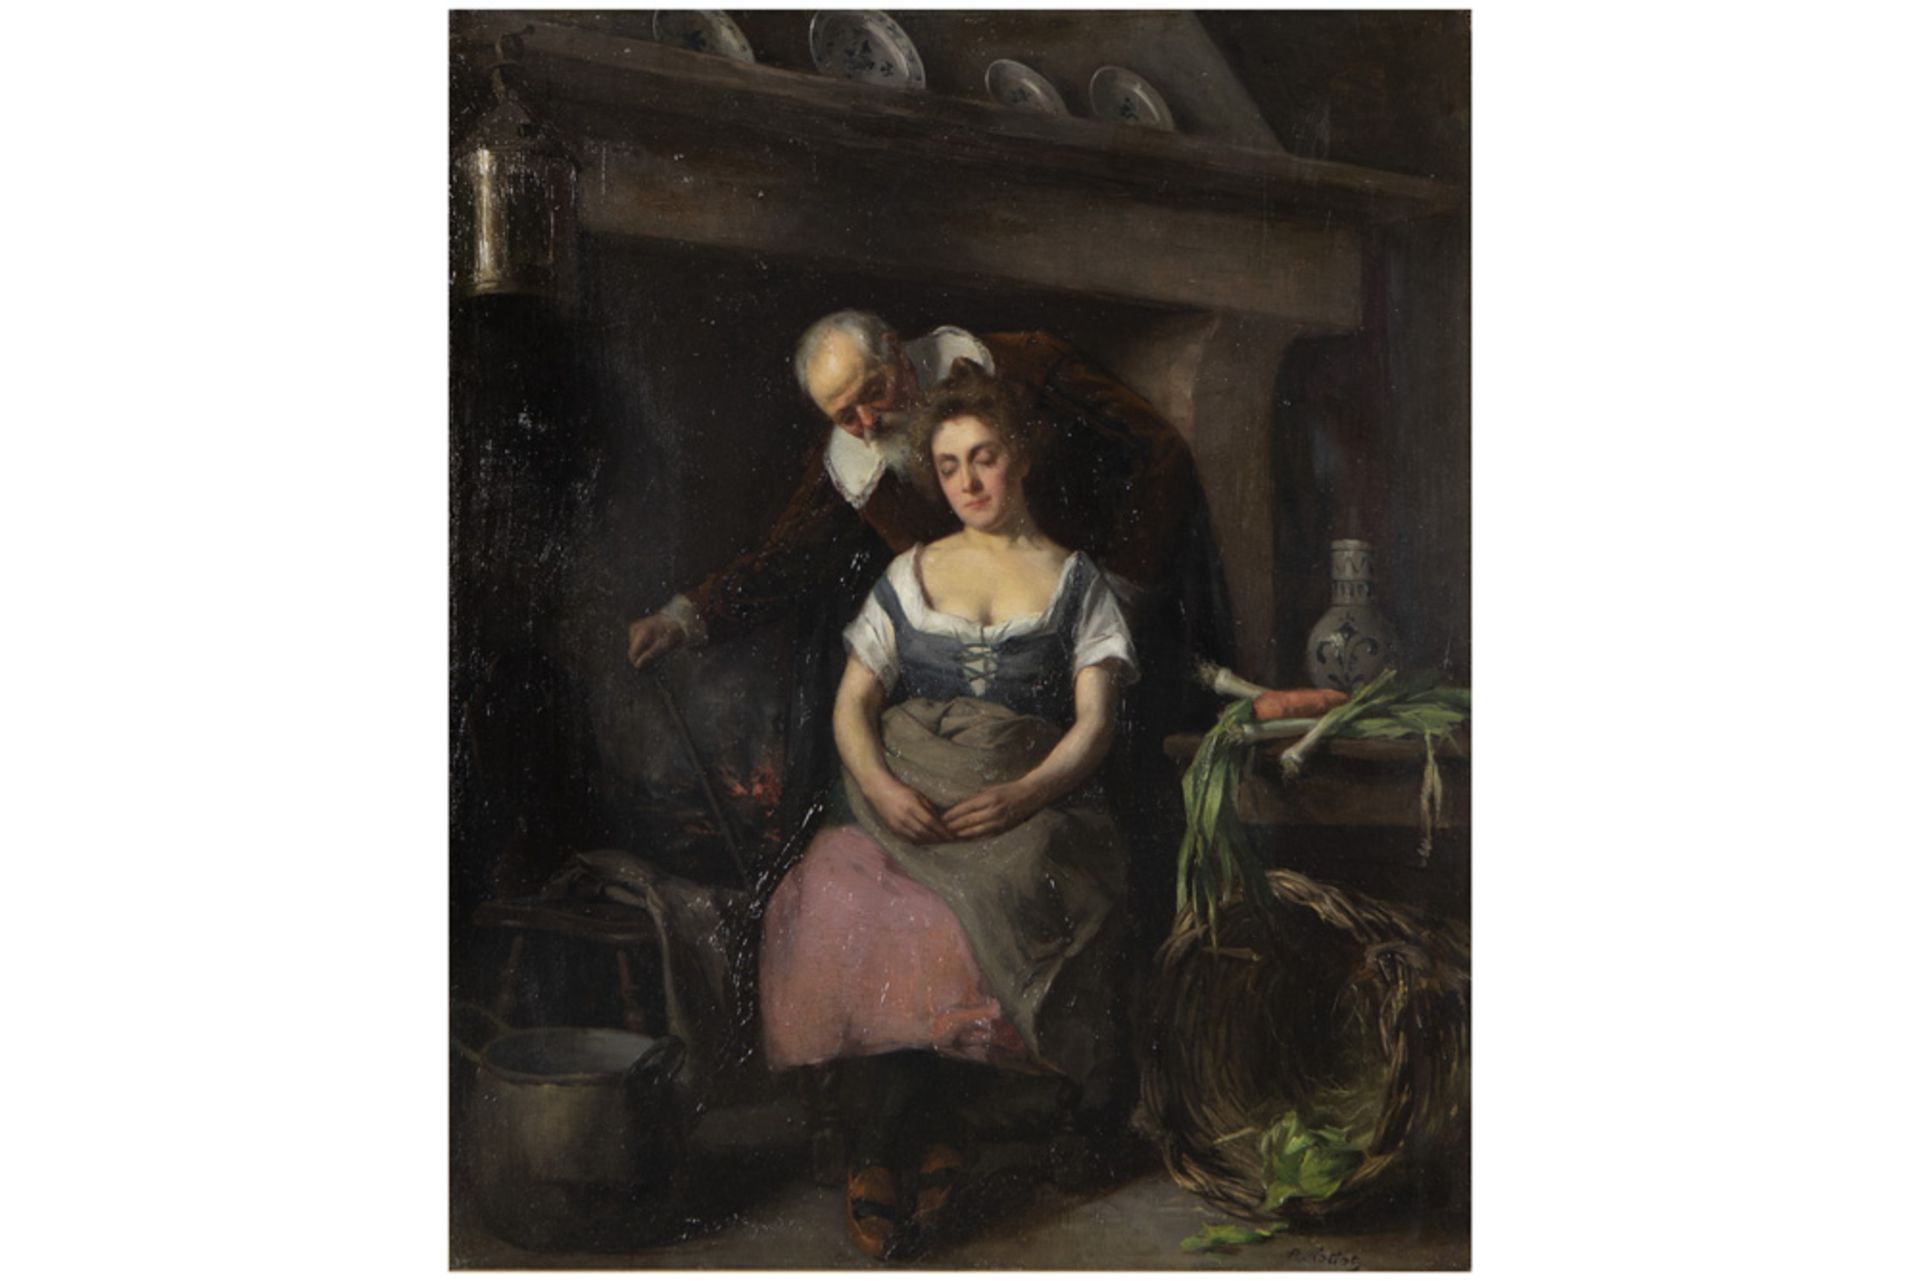 19th Cent. German oil on canvas - signed Richard Lotthe || LOTTHE RICHARD (19°/20° EEUW) Duits